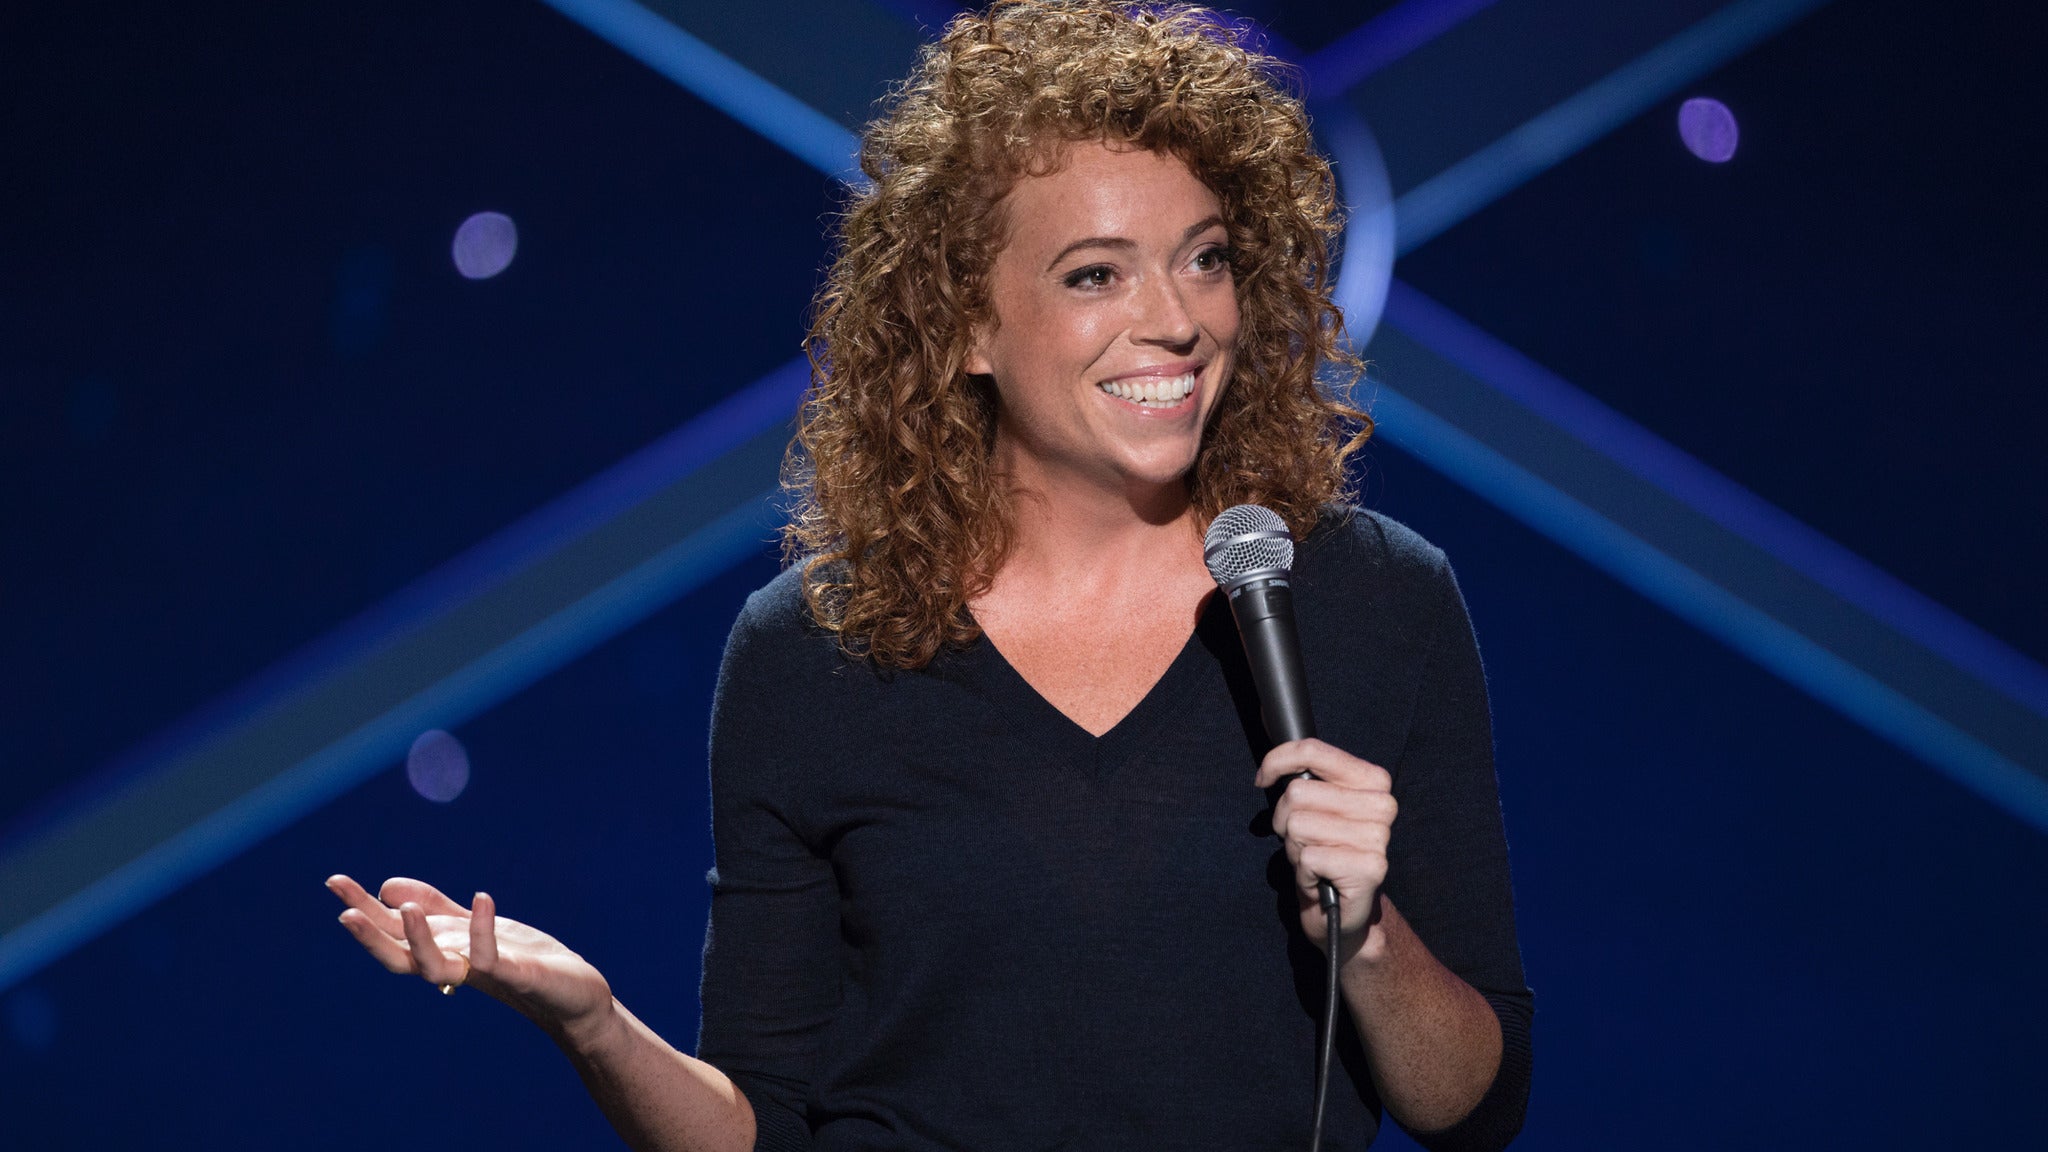 Michelle Wolf in San Francisco promo photo for Live Nation Mobile App presale offer code